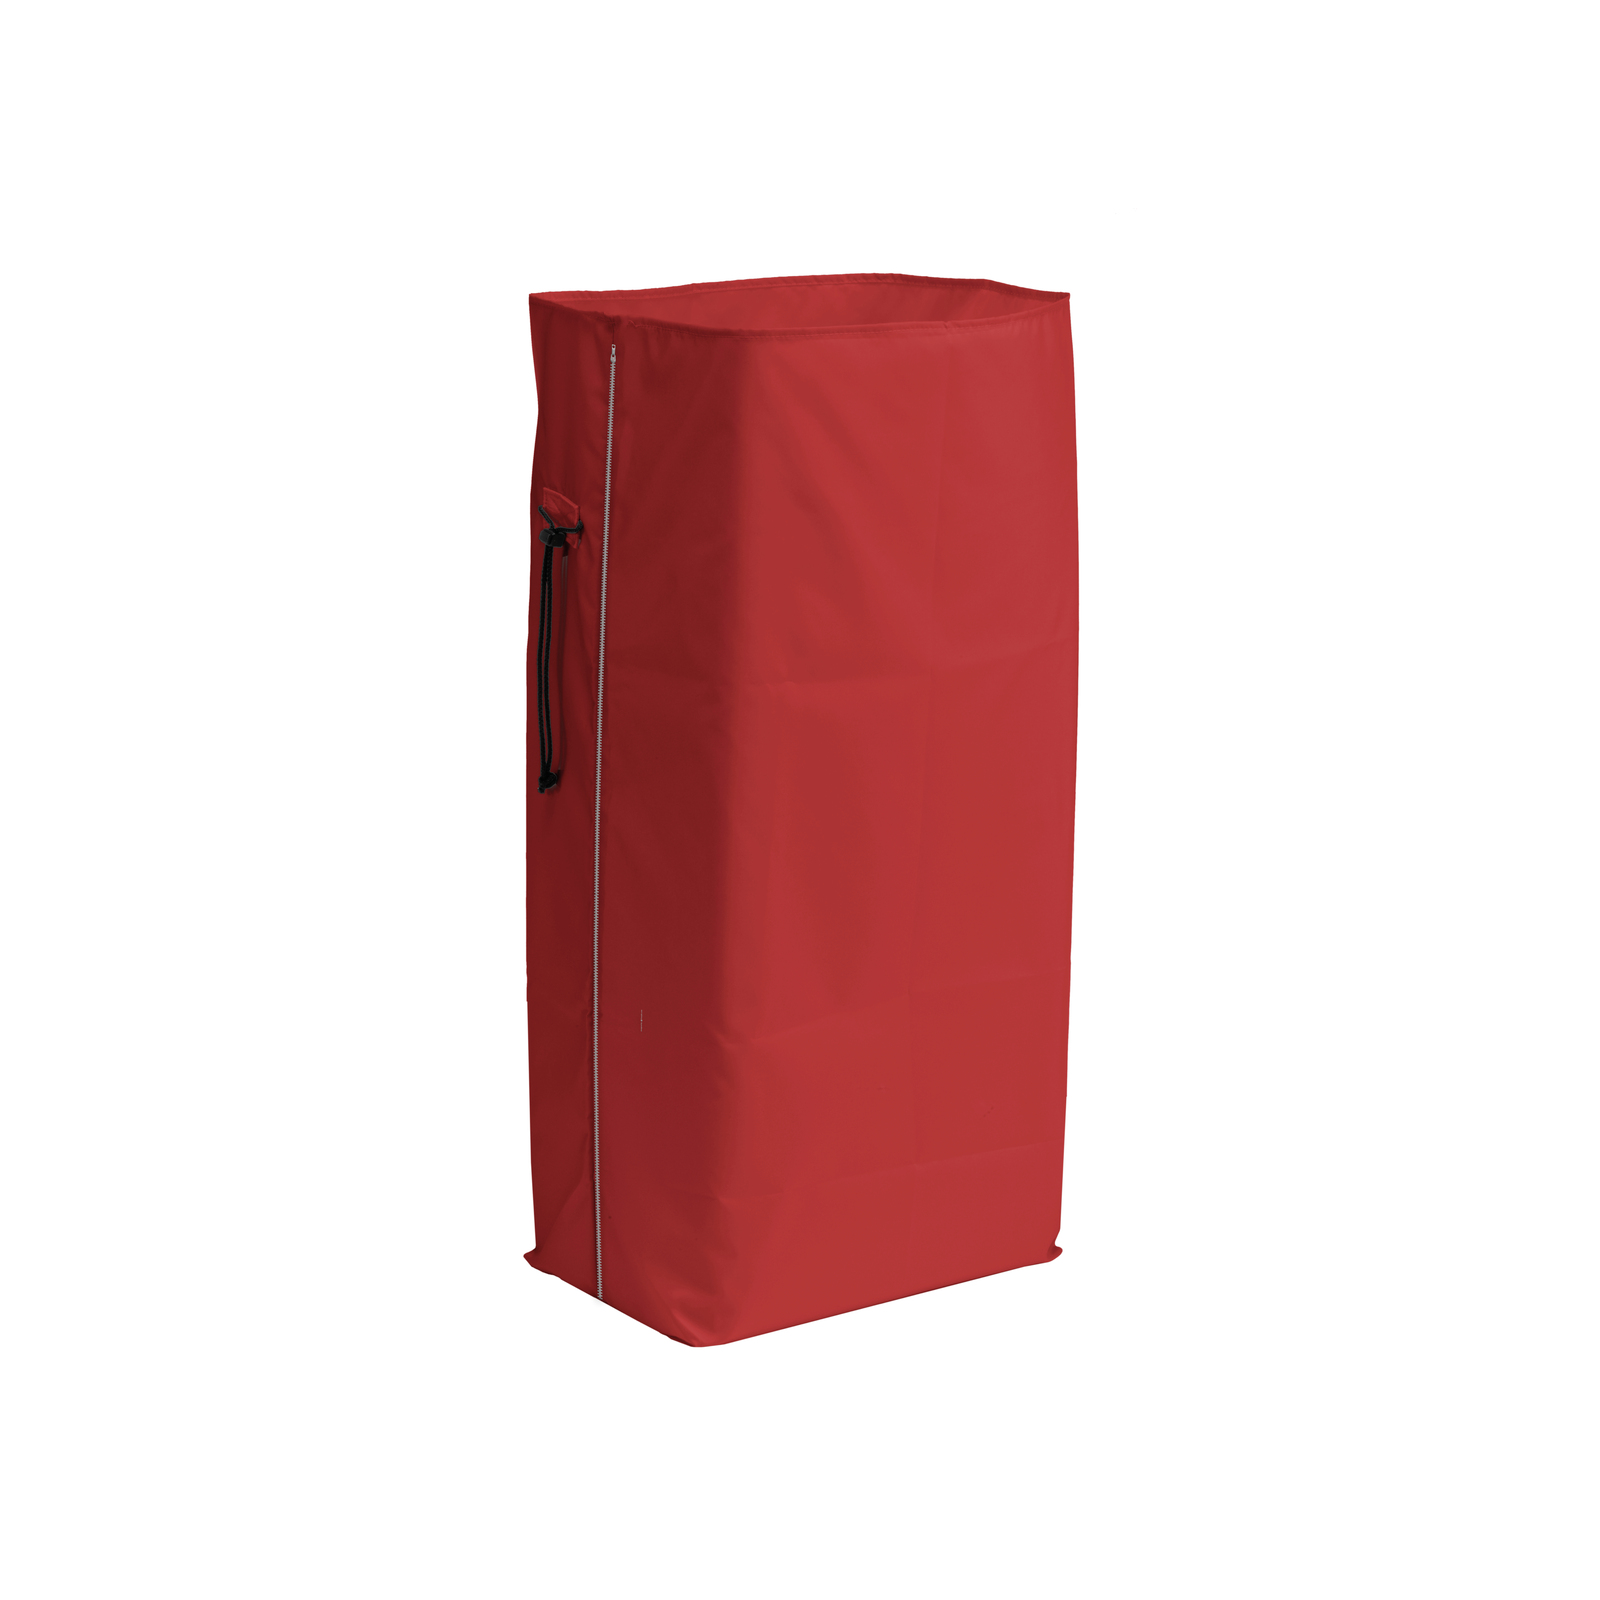 Rubbish bag with zip, red, 120 l